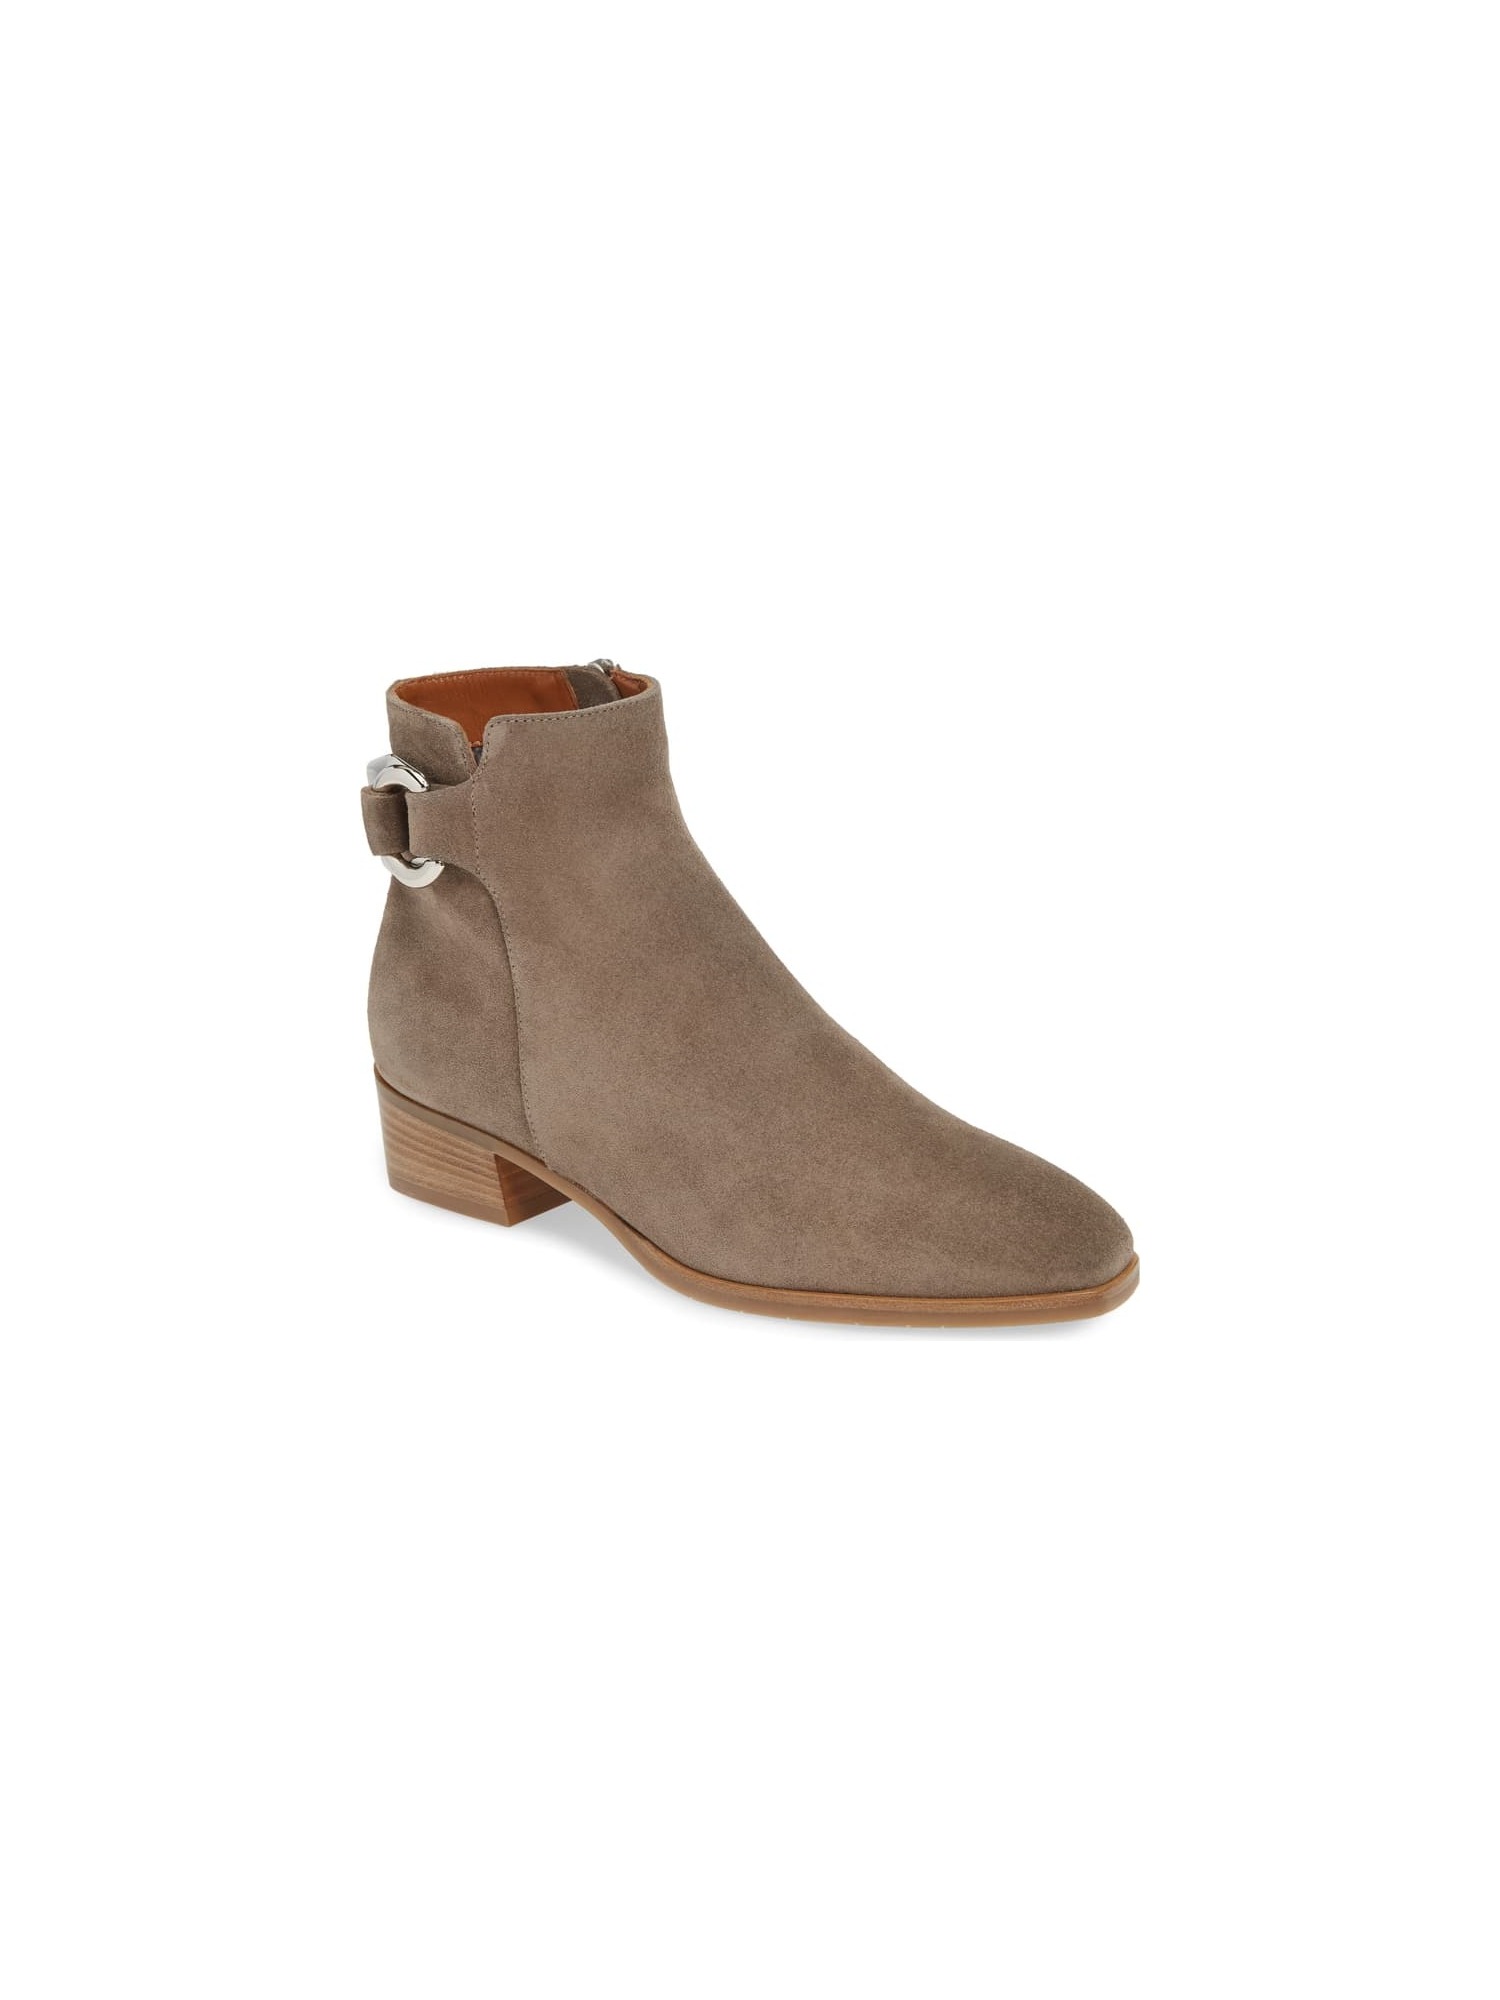 Favorite Suede Deal to Shop on Cyber Monday